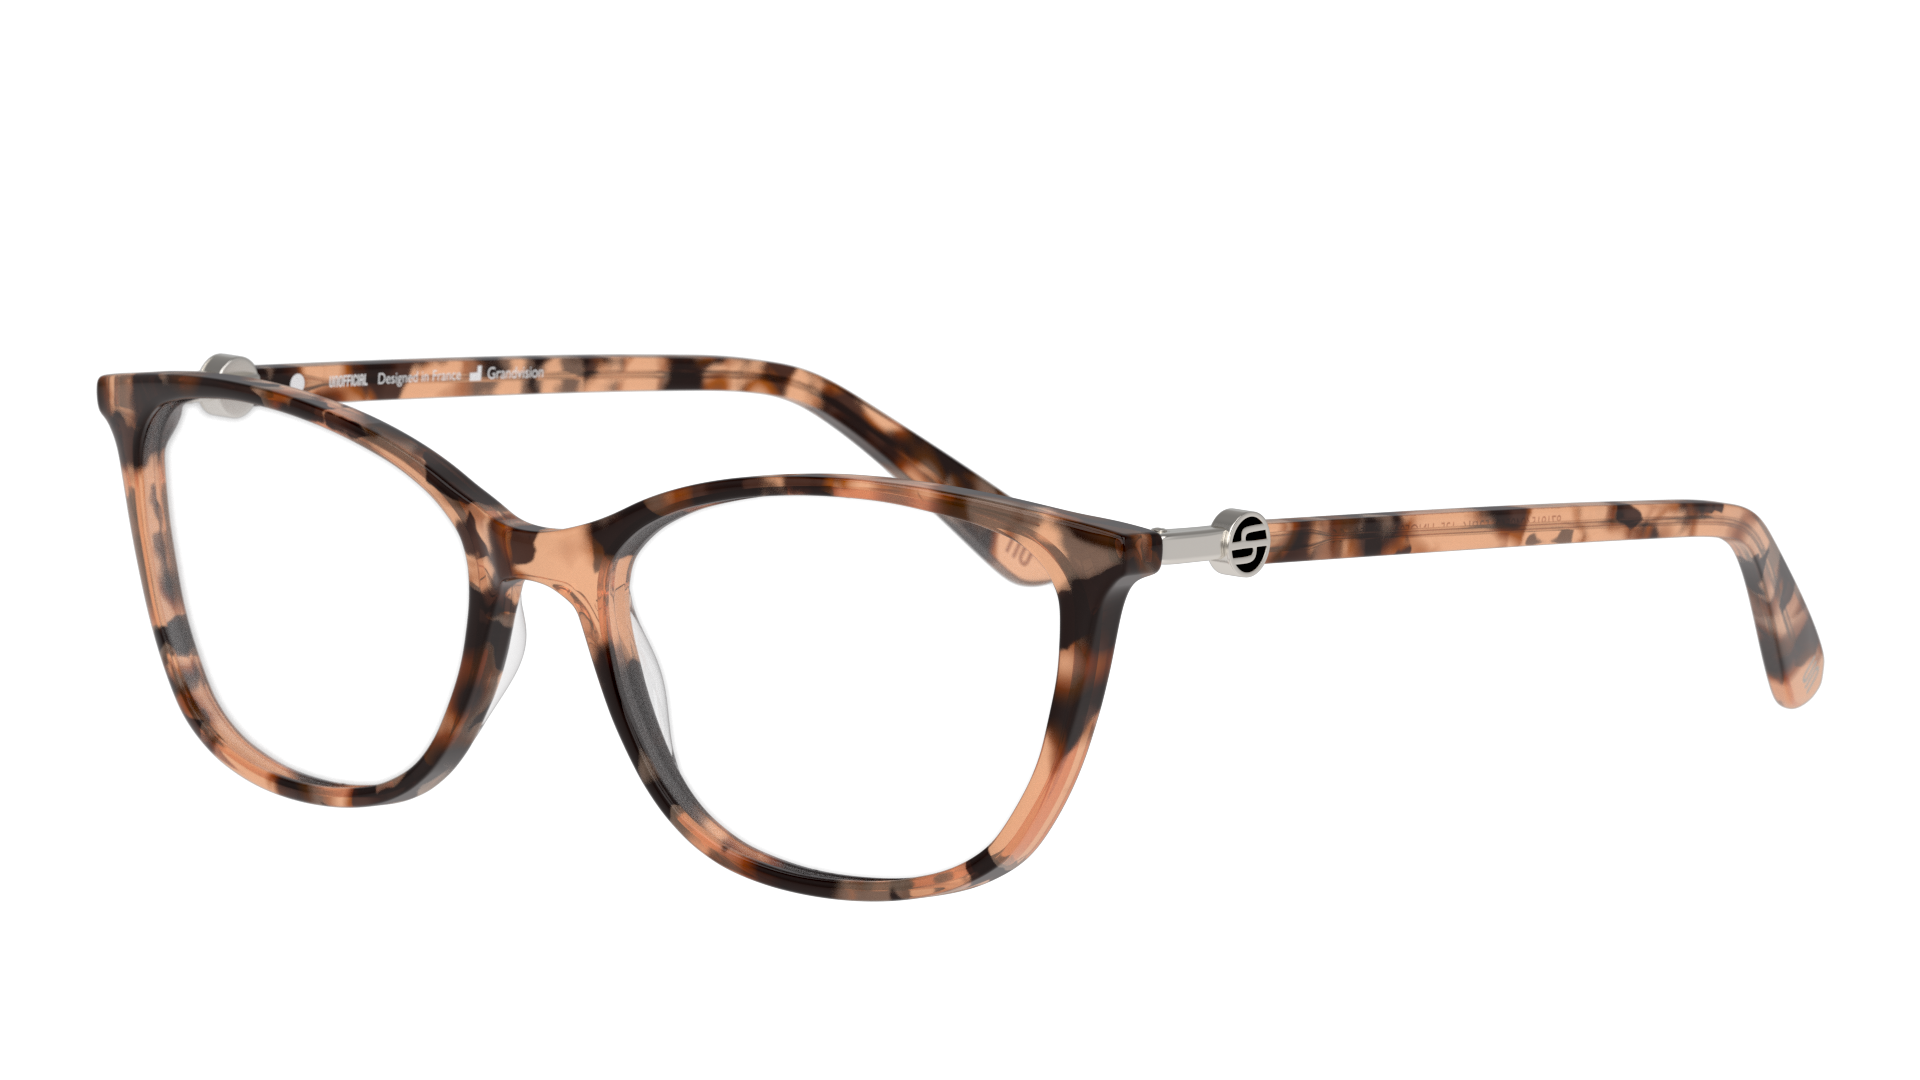 Angle_Left01 Unofficial UNOF0429 (HH00) Glasses Transparent / Tortoise Shell